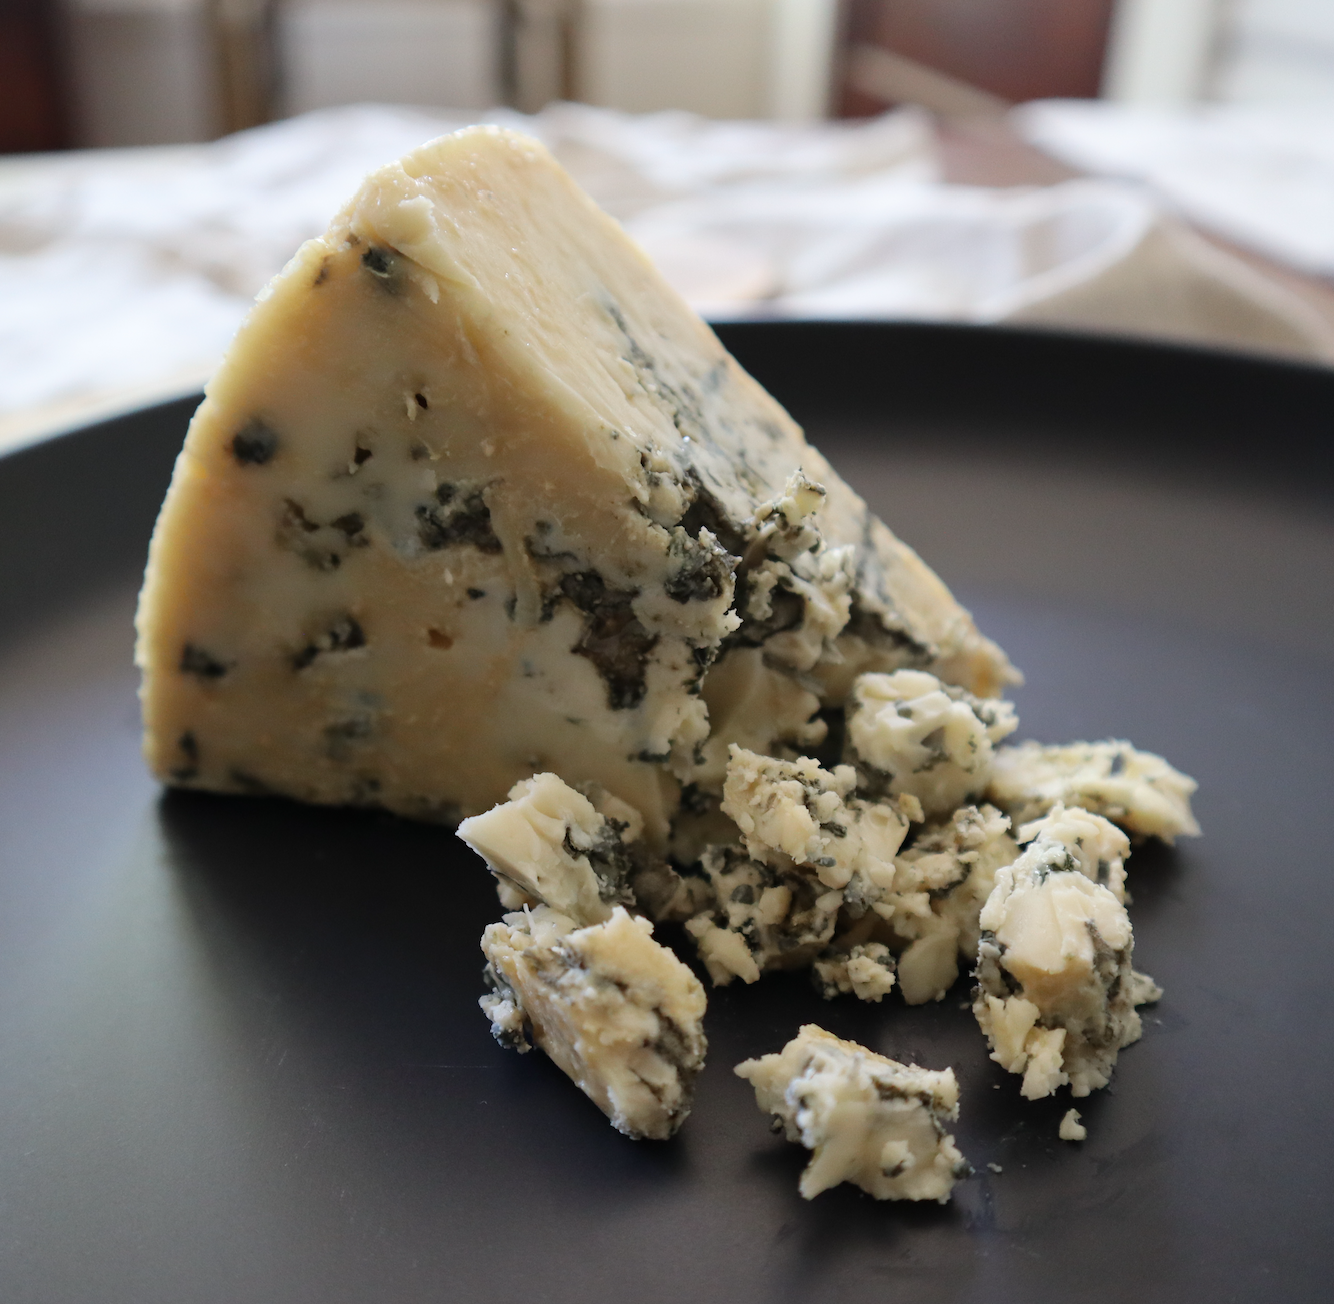 BA BA BLUE / Carr Valley Cheese / Wisconsin / Past. Sheep / Blue